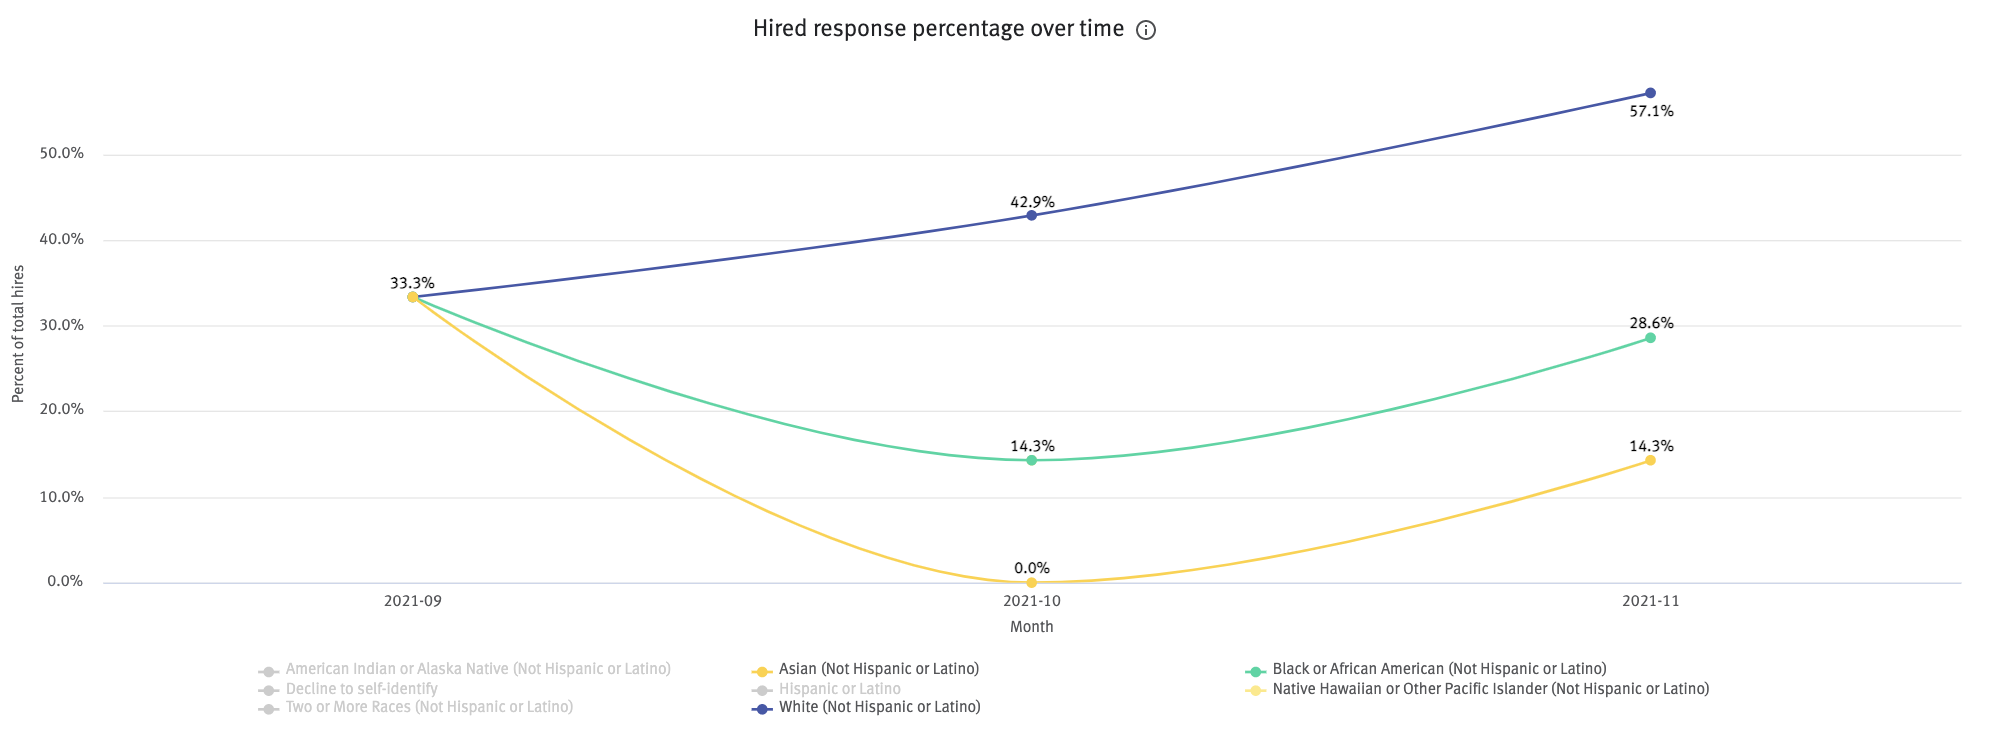 Hired response percentage over time chart